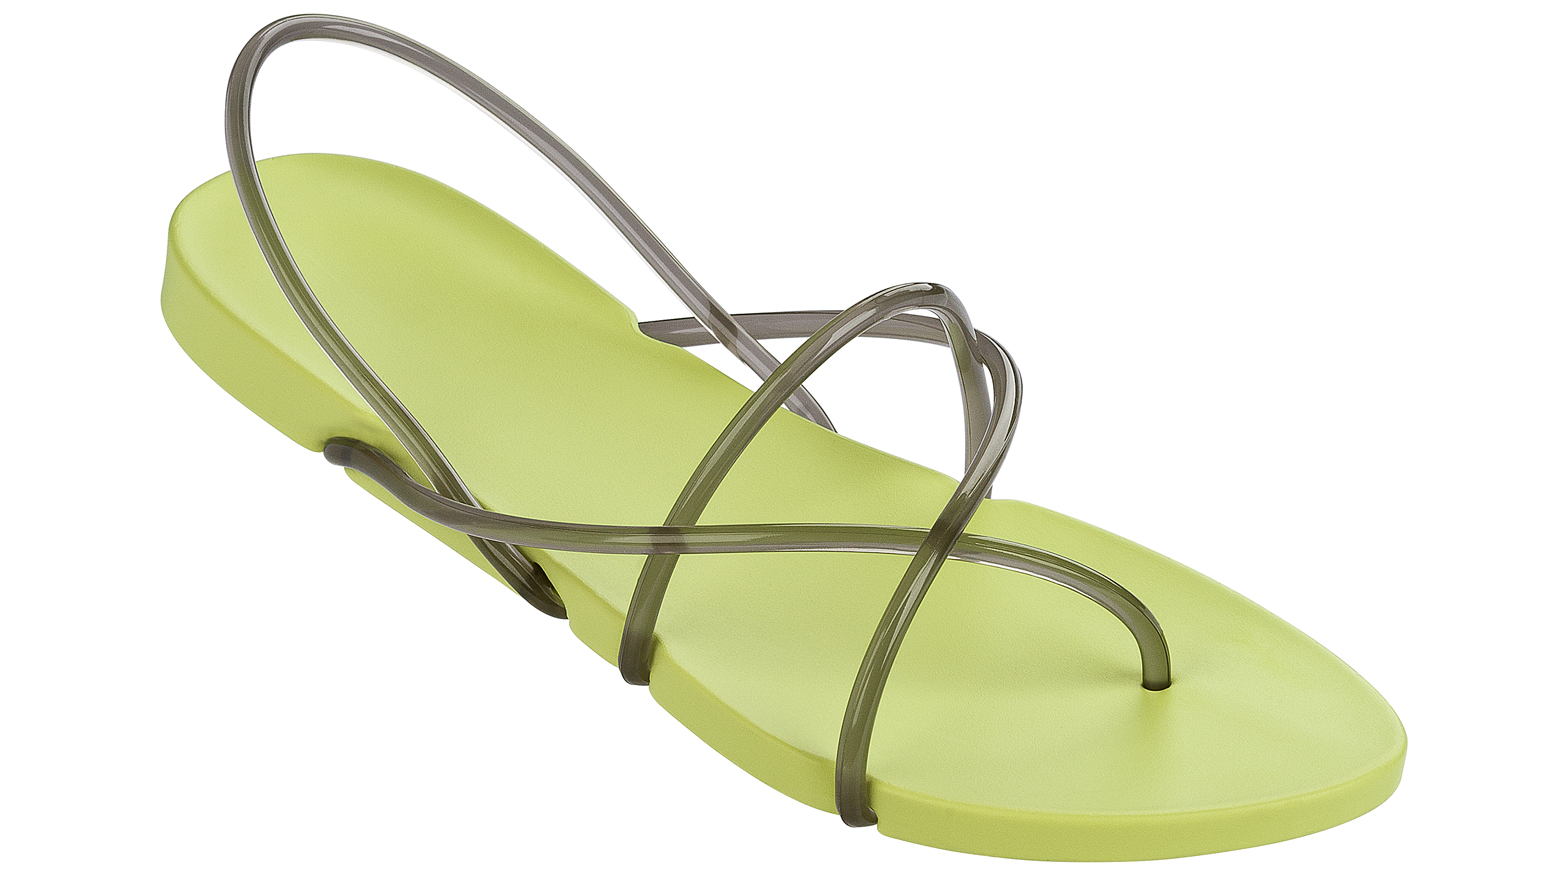 Philippe recyclable flip-flops for Ipanema